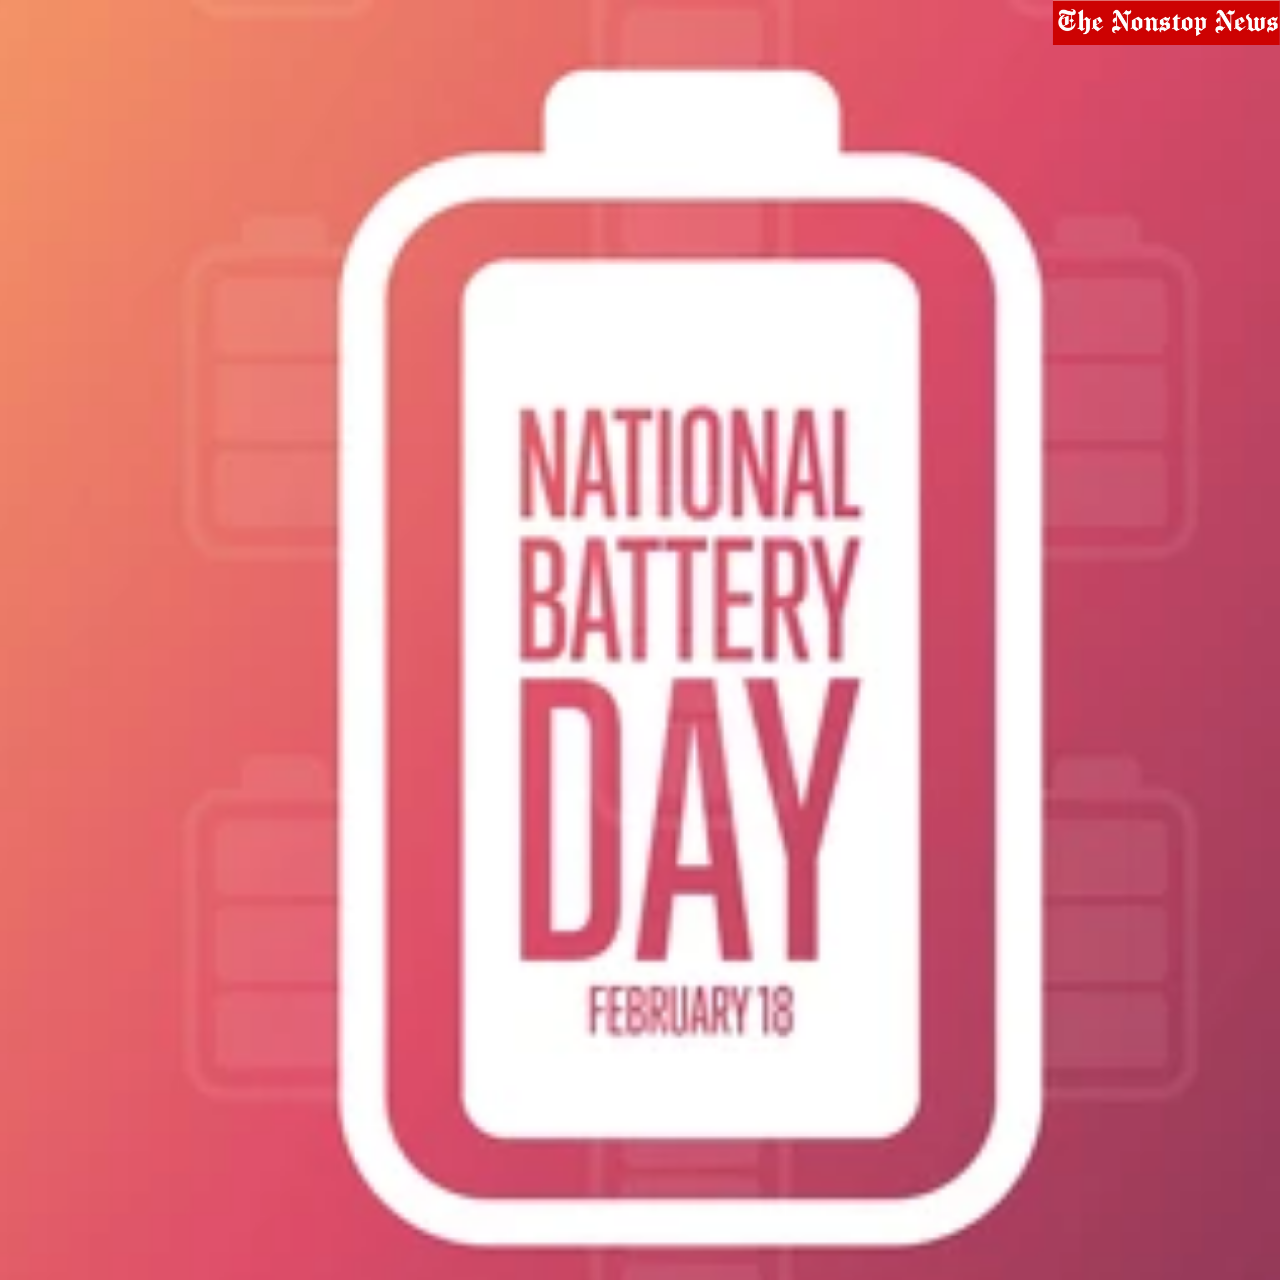 National Battery Day (USA) 2022 Quotes, HD Images, Messages, to create awareness